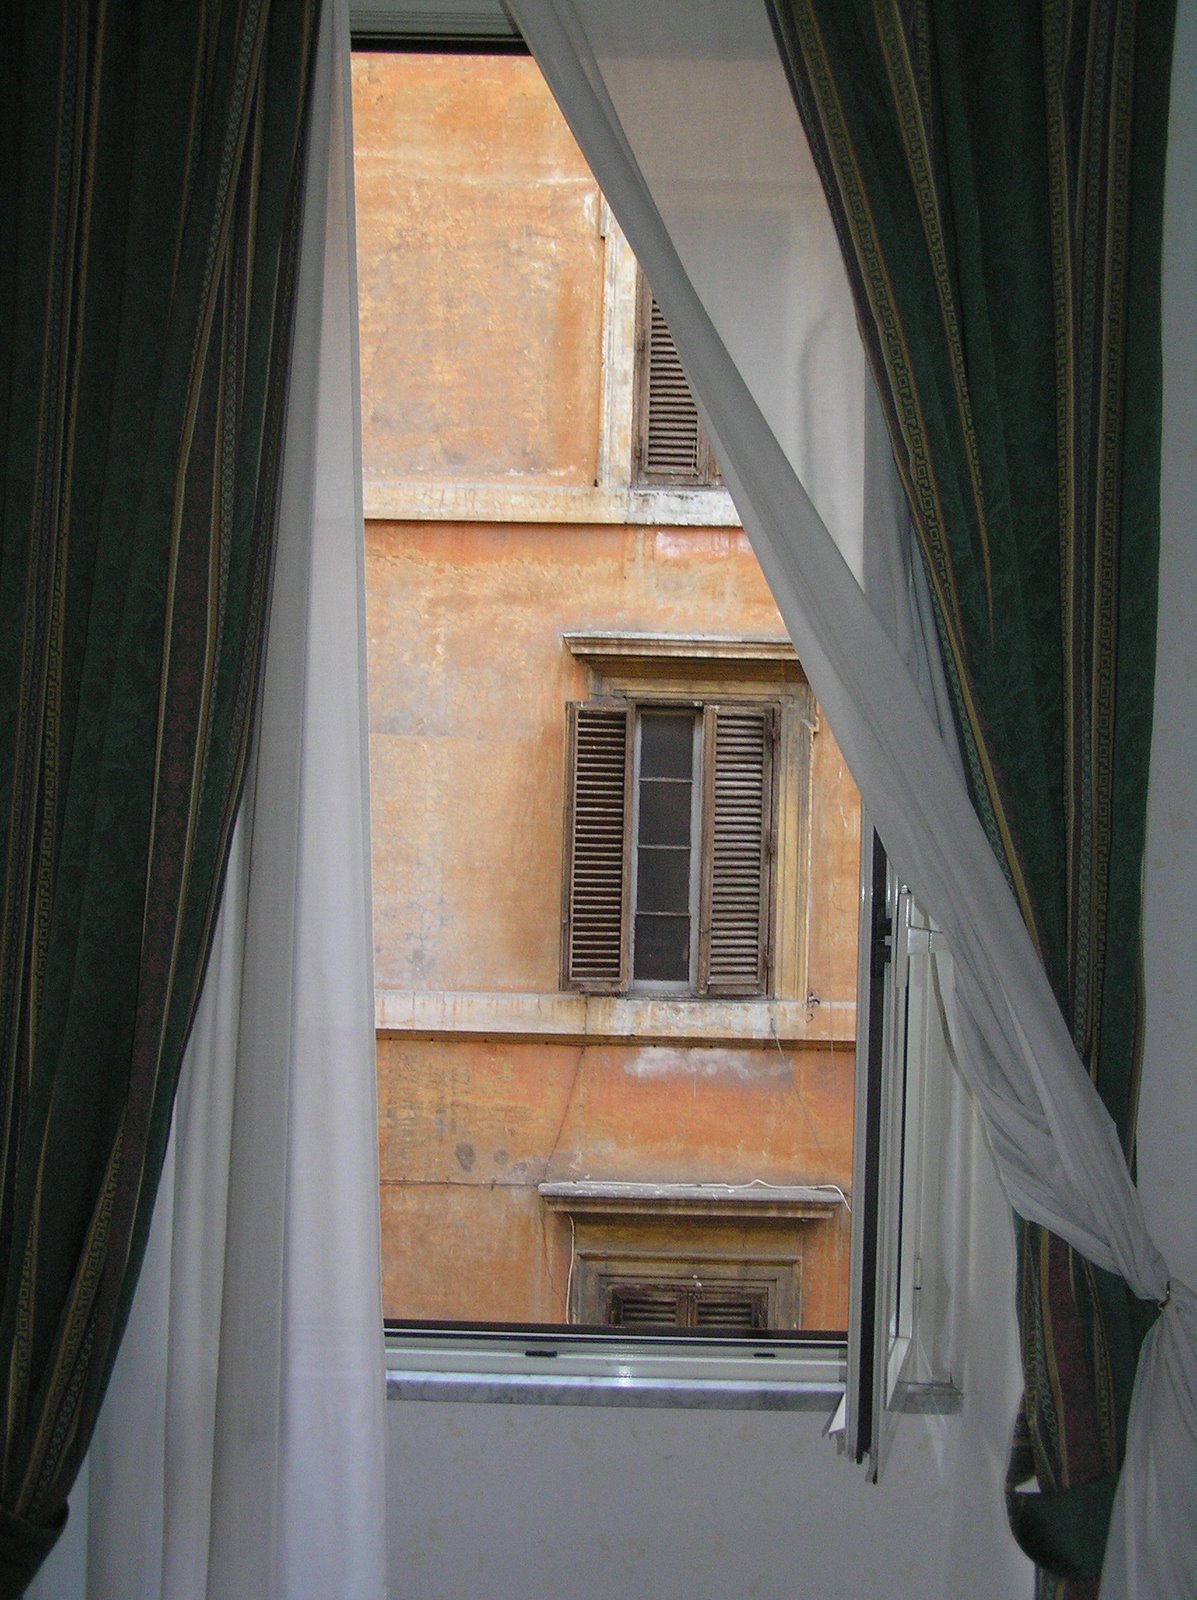 [view+out+first+hotel+window+rome.jpg]